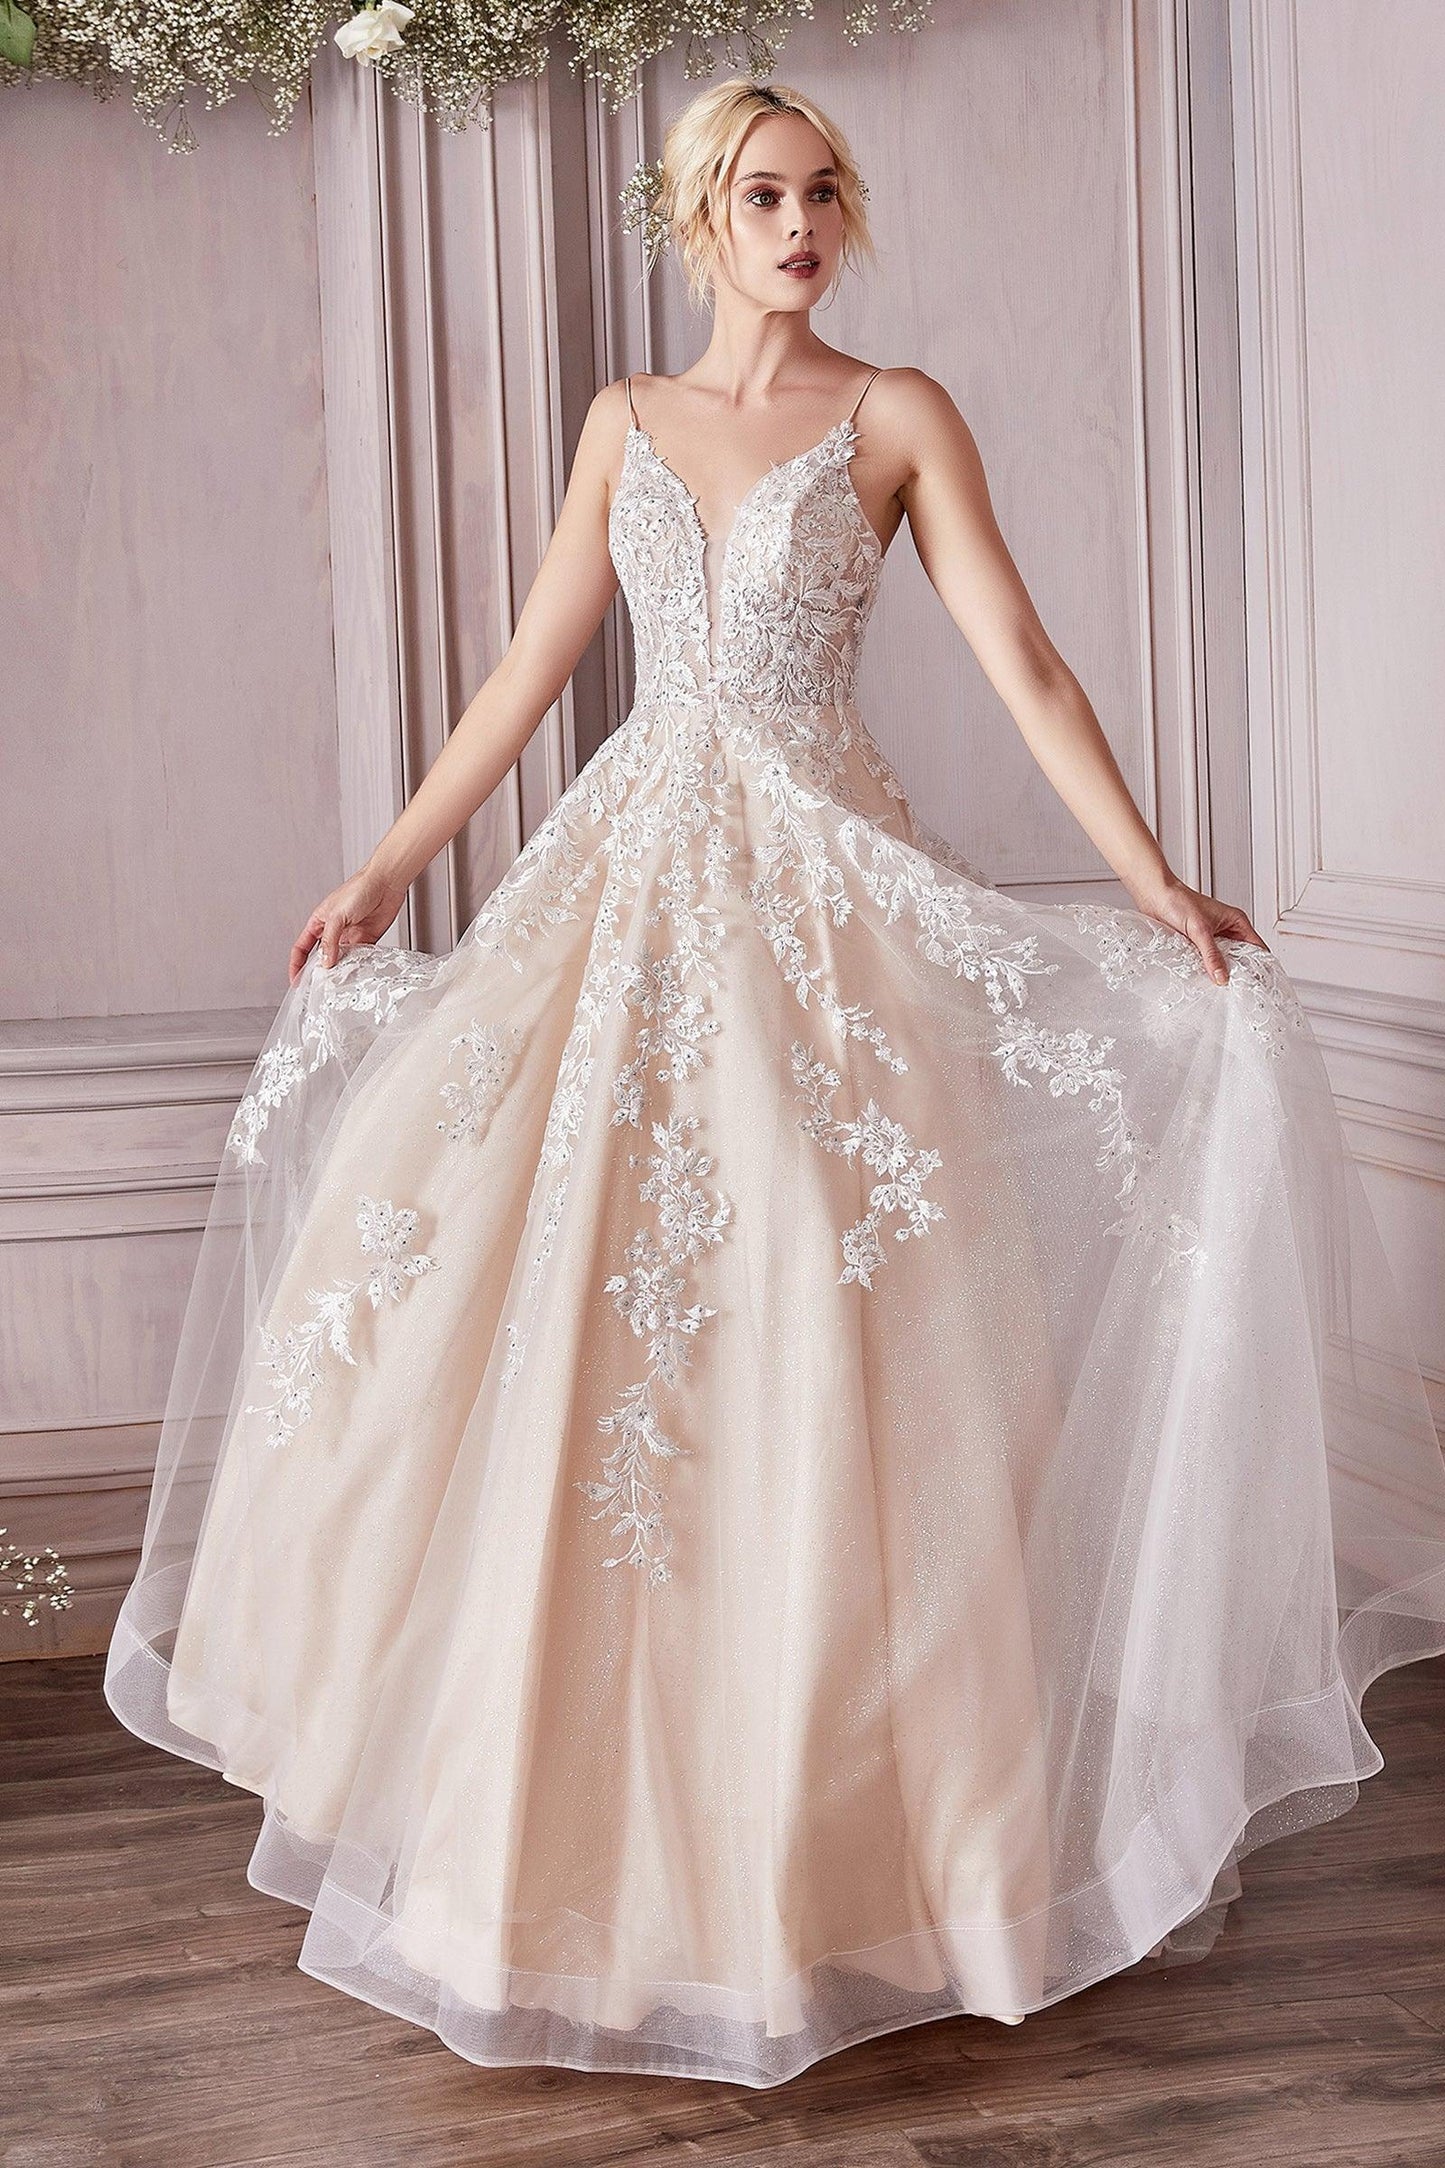 Spaghetti Strap Lace Applique Wedding Dress - The Dress Outlet